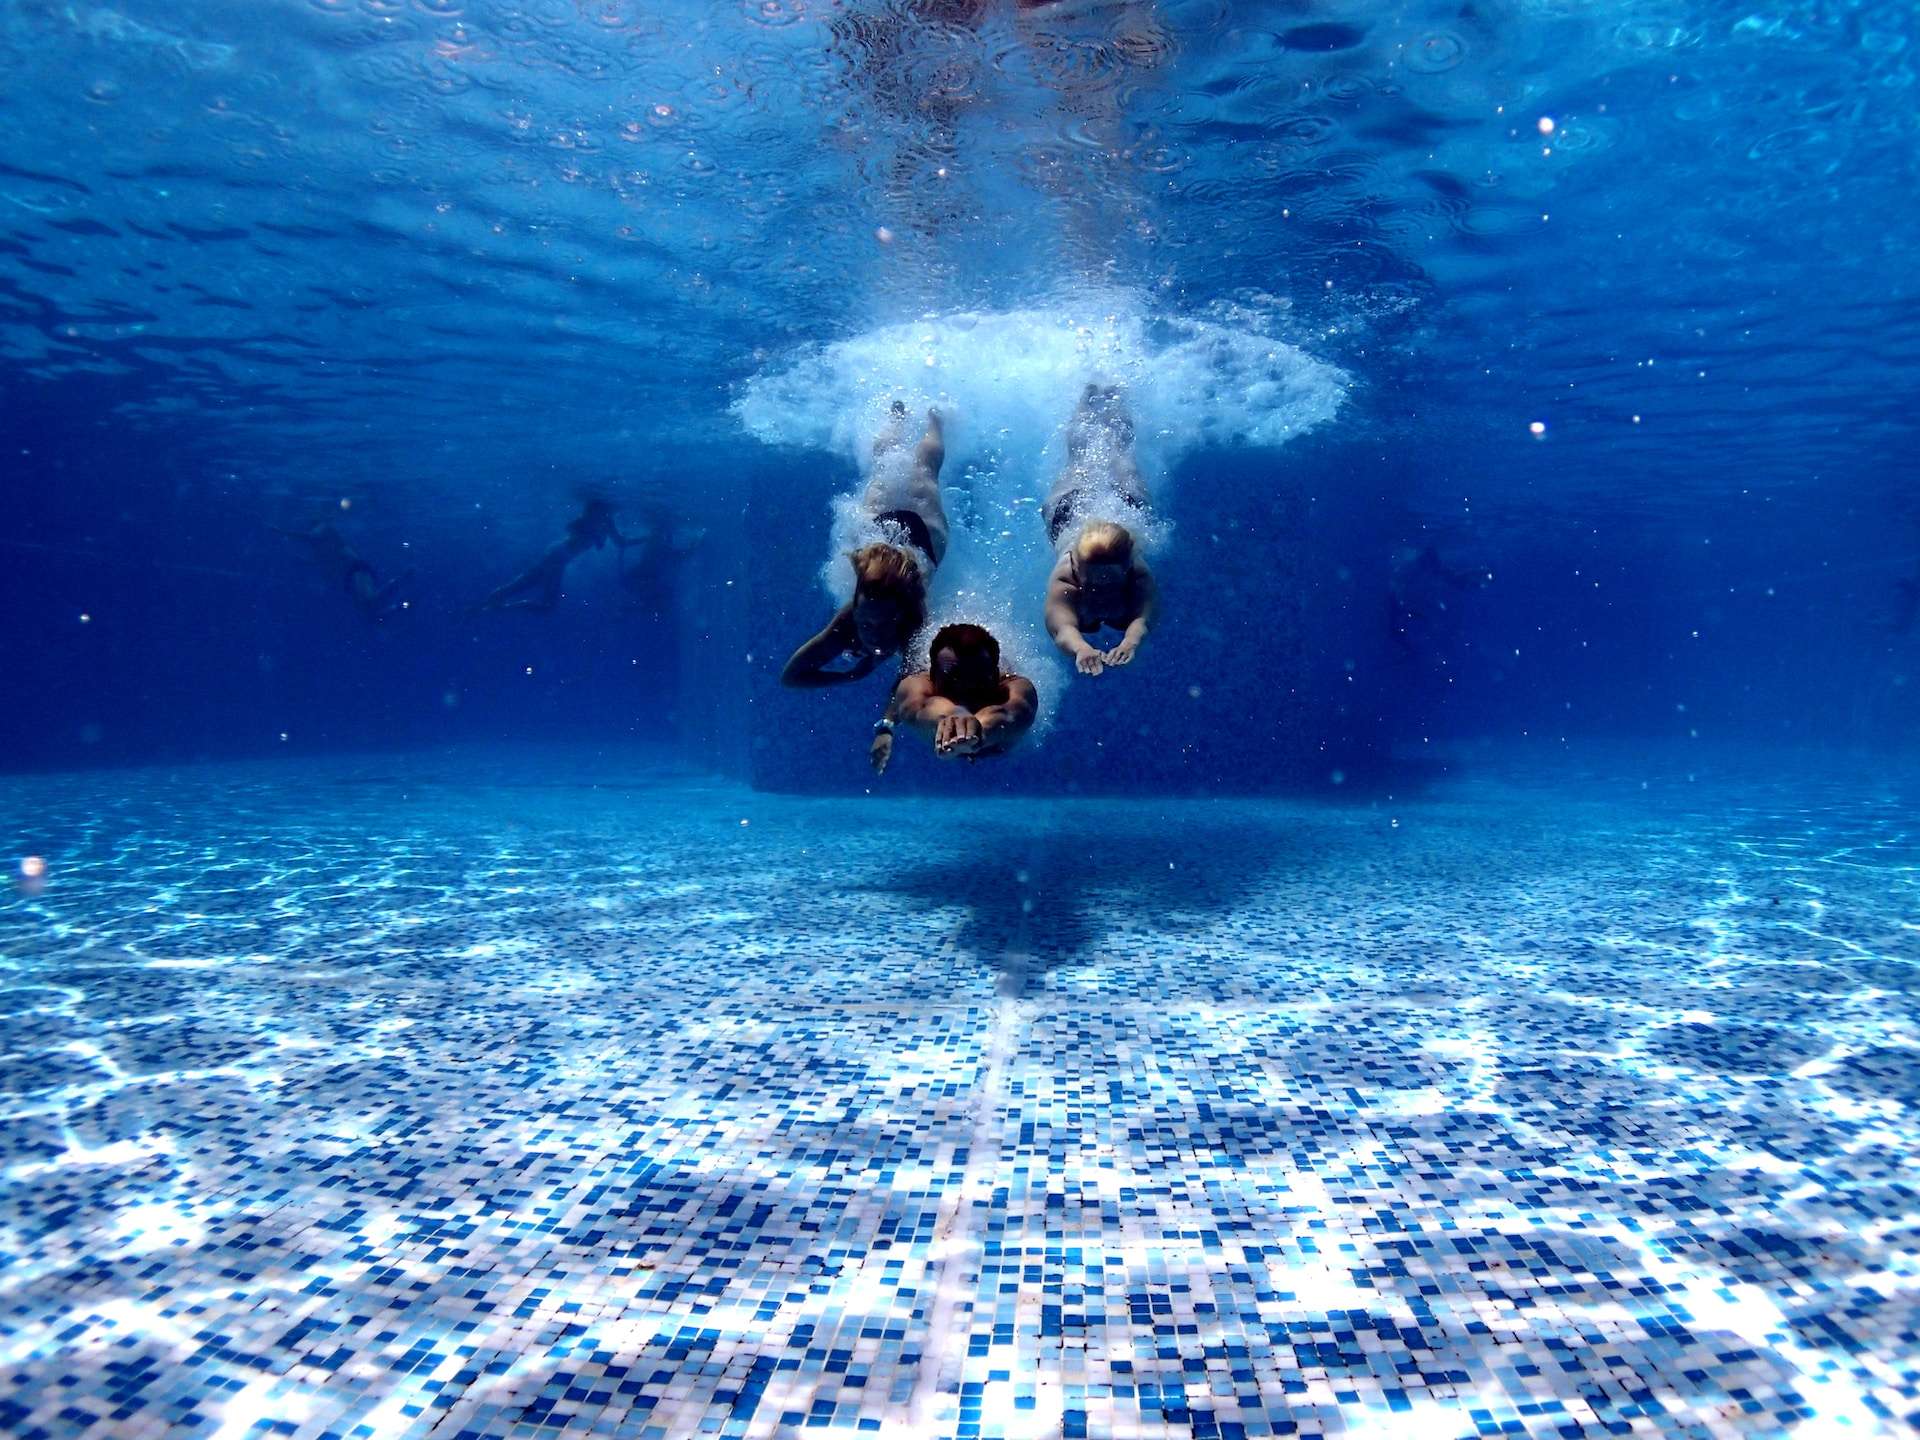 three person diving into the water